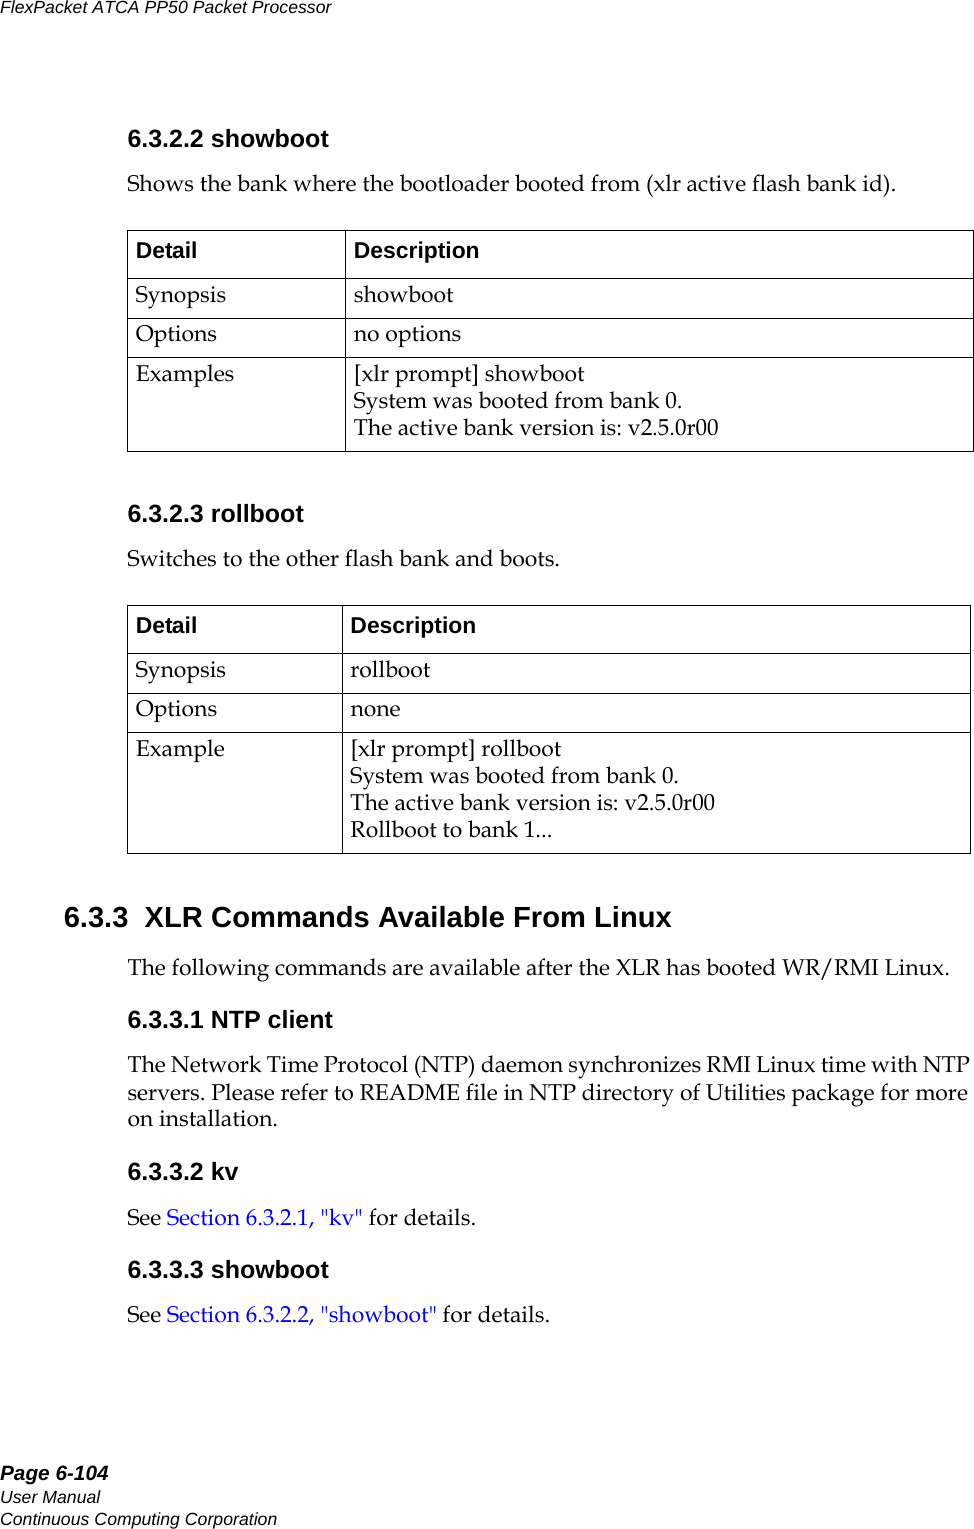 Page 6-104User ManualContinuous Computing CorporationFlexPacket ATCA PP50 Packet Processor     Preliminary6.3.2.2 showbootShows the bank where the bootloader booted from (xlr active flash bank id).6.3.2.3 rollbootSwitches to the other flash bank and boots.6.3.3  XLR Commands Available From LinuxThe following commands are available after the XLR has booted WR/RMI Linux.6.3.3.1 NTP clientThe Network Time Protocol (NTP) daemon synchronizes RMI Linux time with NTP servers. Please refer to README file in NTP directory of Utilities package for more on installation.6.3.3.2 kv See Section6.3.2.1, &quot;kv&quot; for details.6.3.3.3 showbootSee Section6.3.2.2, &quot;showboot&quot; for details.Detail DescriptionSynopsis showbootOptions no optionsExamples [xlr prompt] showbootSystem was booted from bank 0.The active bank version is: v2.5.0r00Detail DescriptionSynopsis rollbootOptions noneExample [xlr prompt] rollbootSystem was booted from bank 0.The active bank version is: v2.5.0r00Rollboot to bank 1...